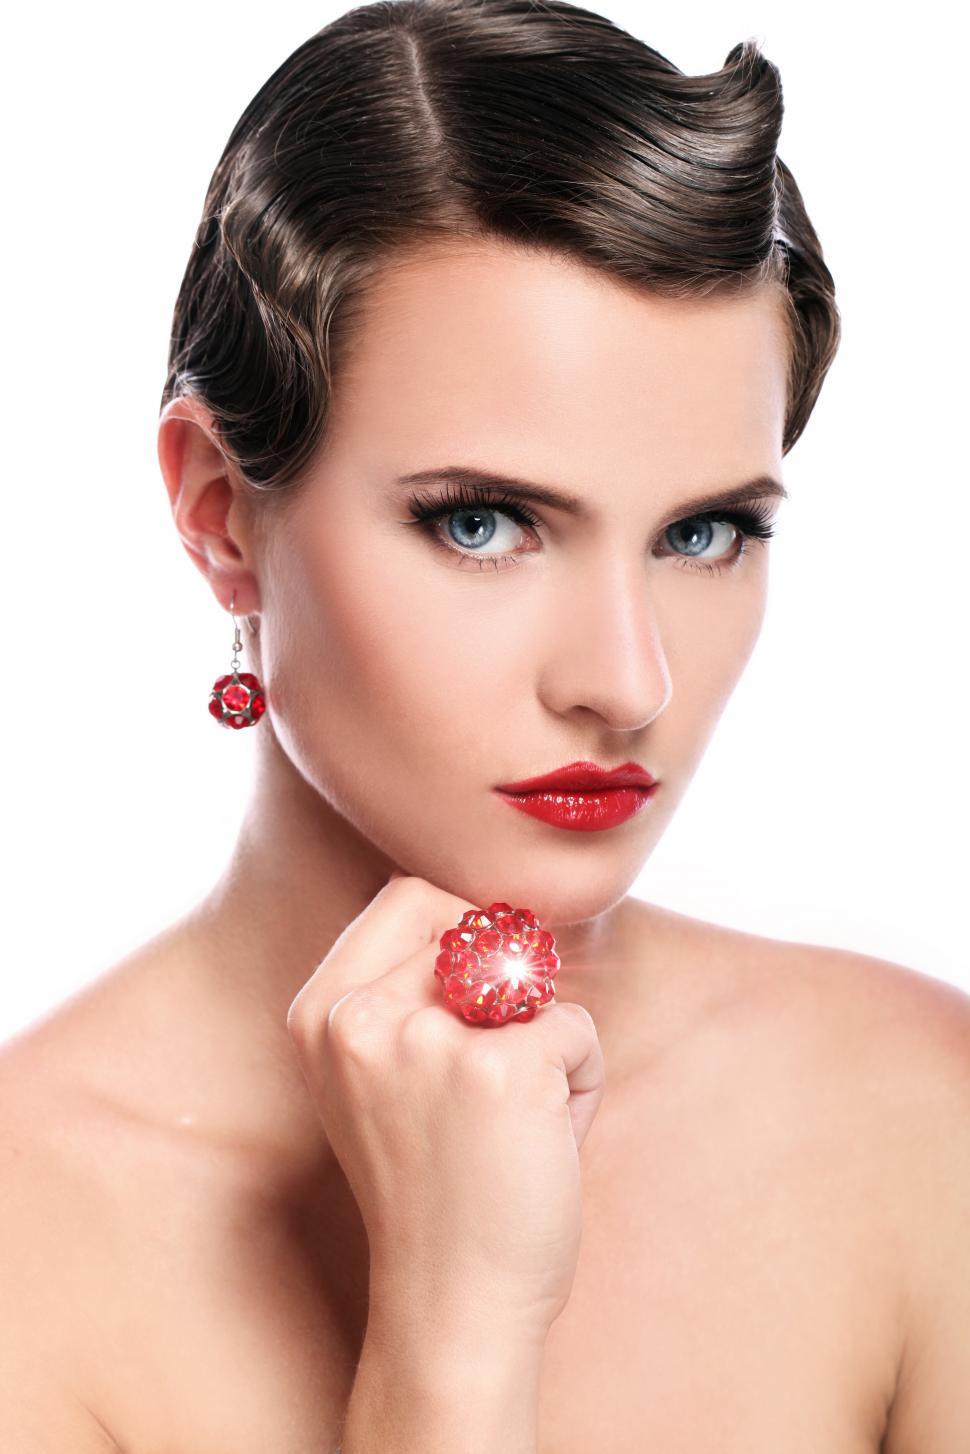 Free Image of Young woman with short dark hair and red jeweled ring 